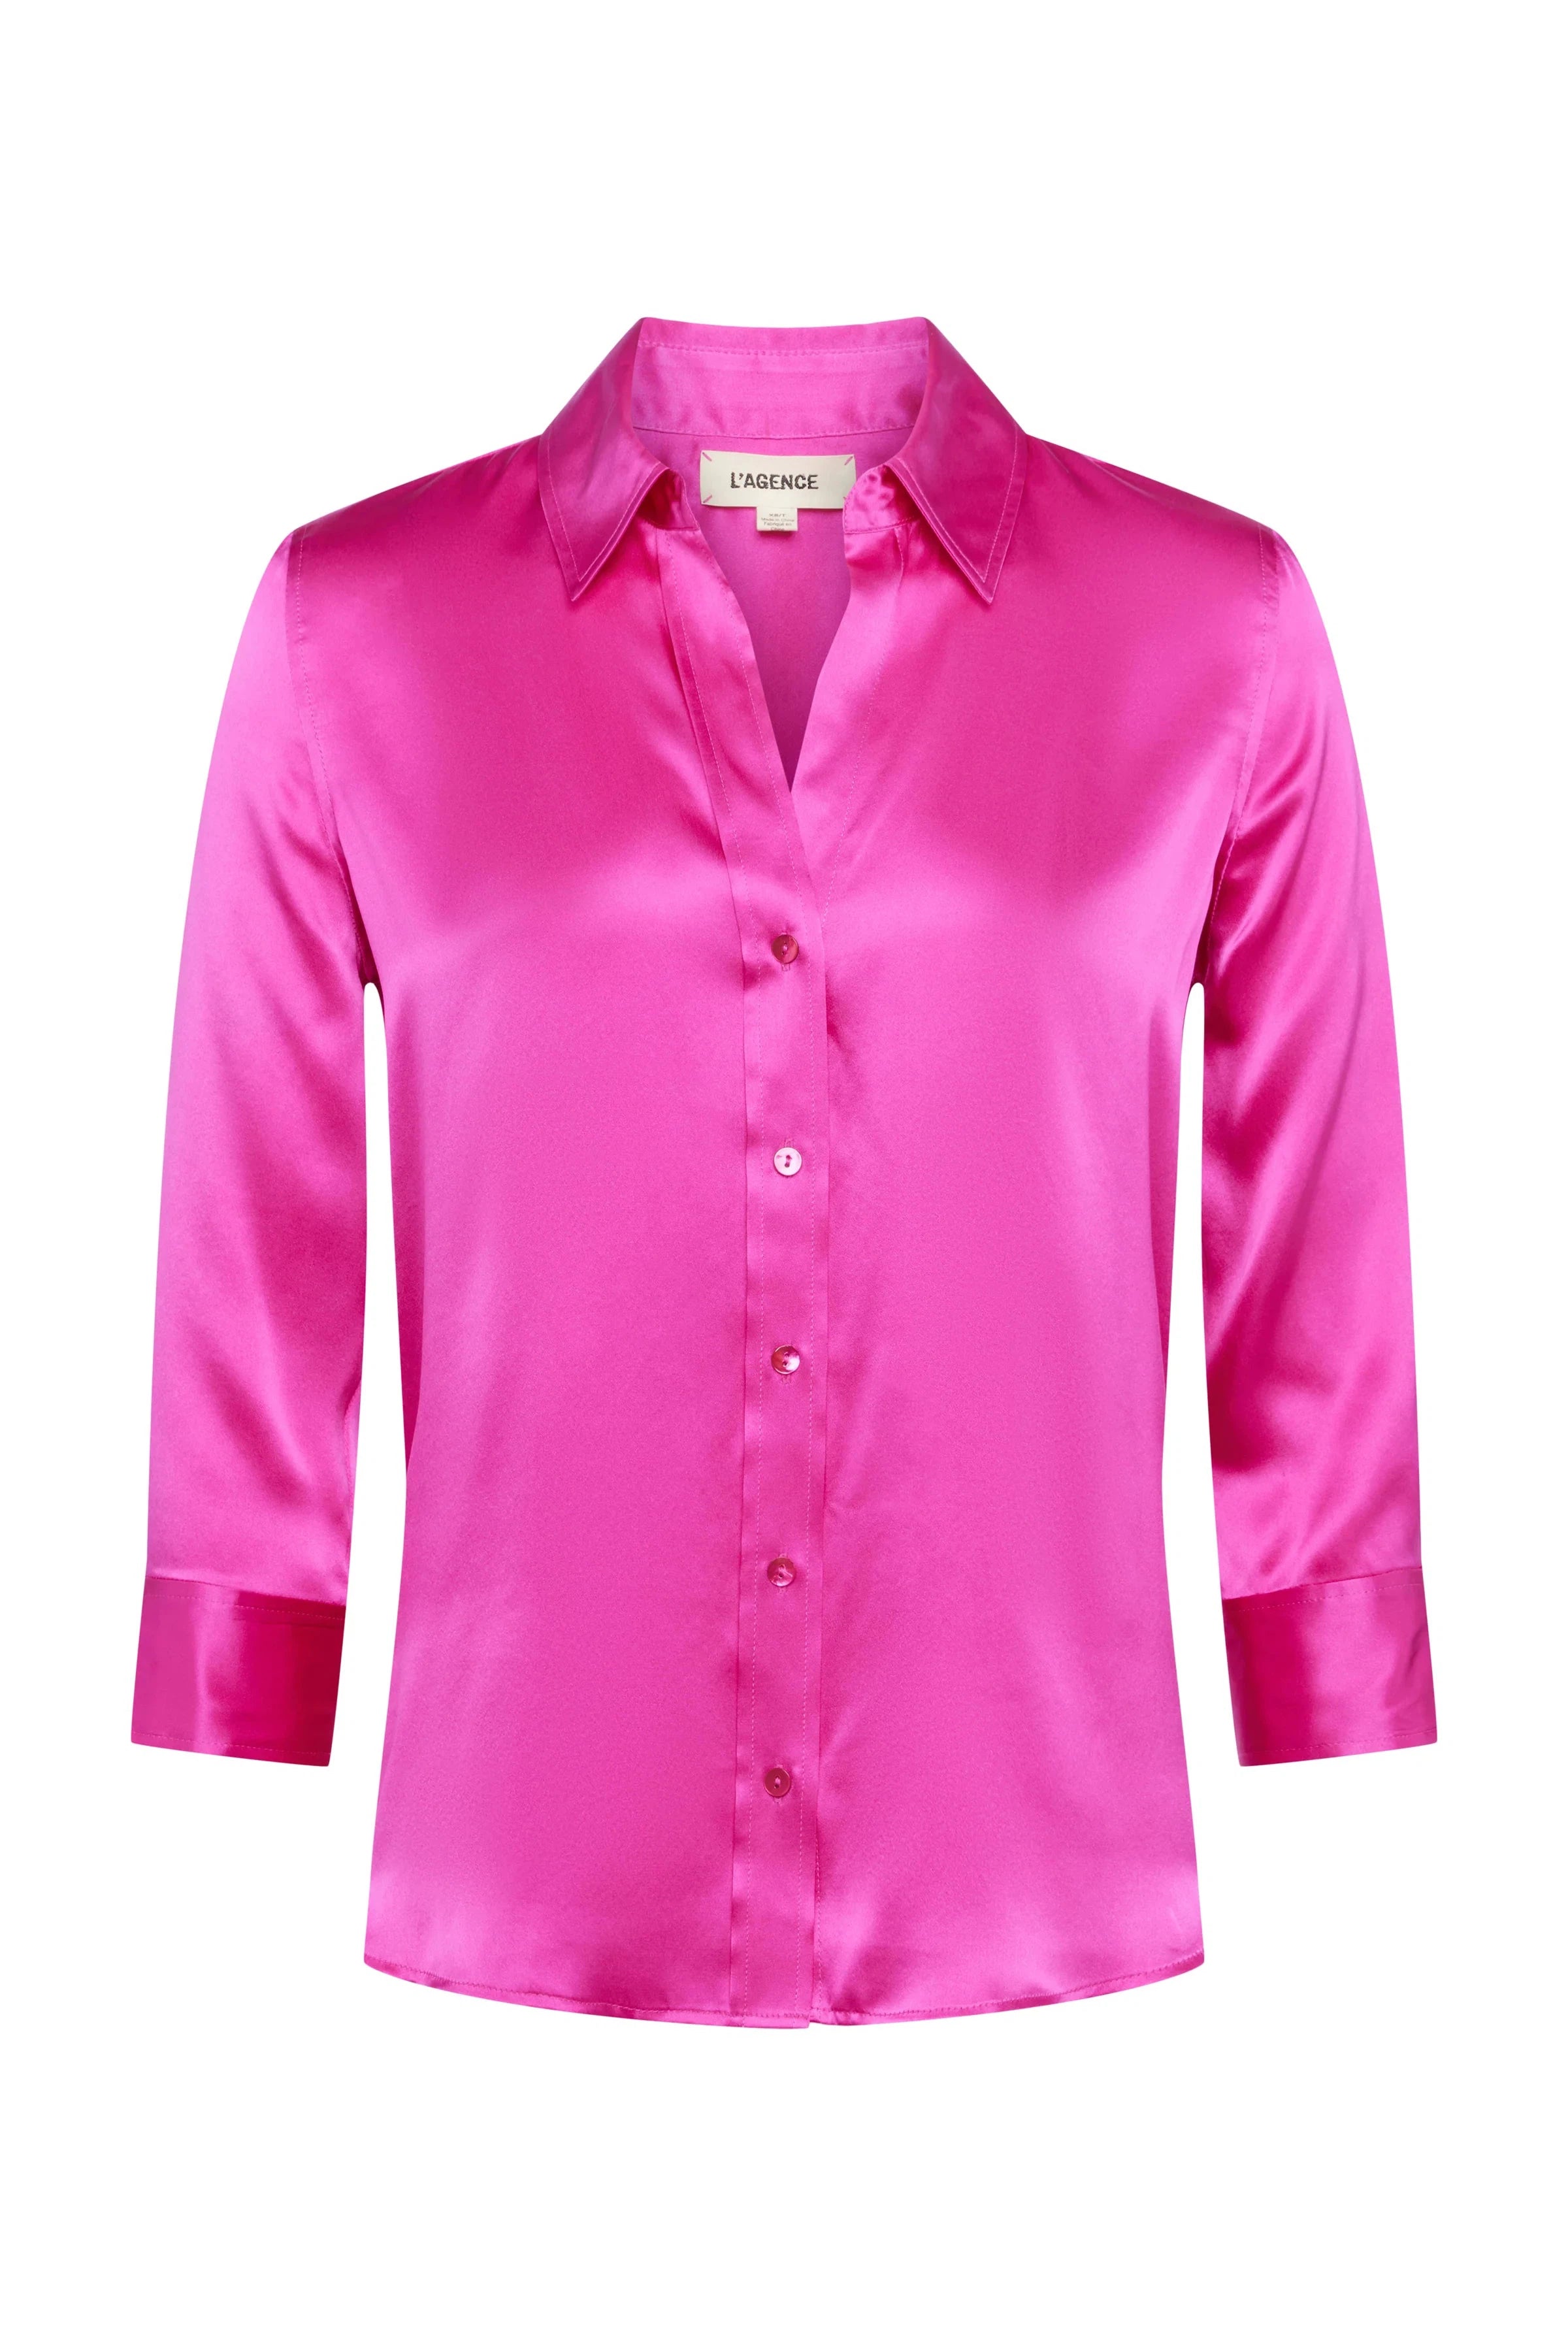 L'AGENCE DANI 3/4 SLEEVE BLOUSE IN STAR RUBY